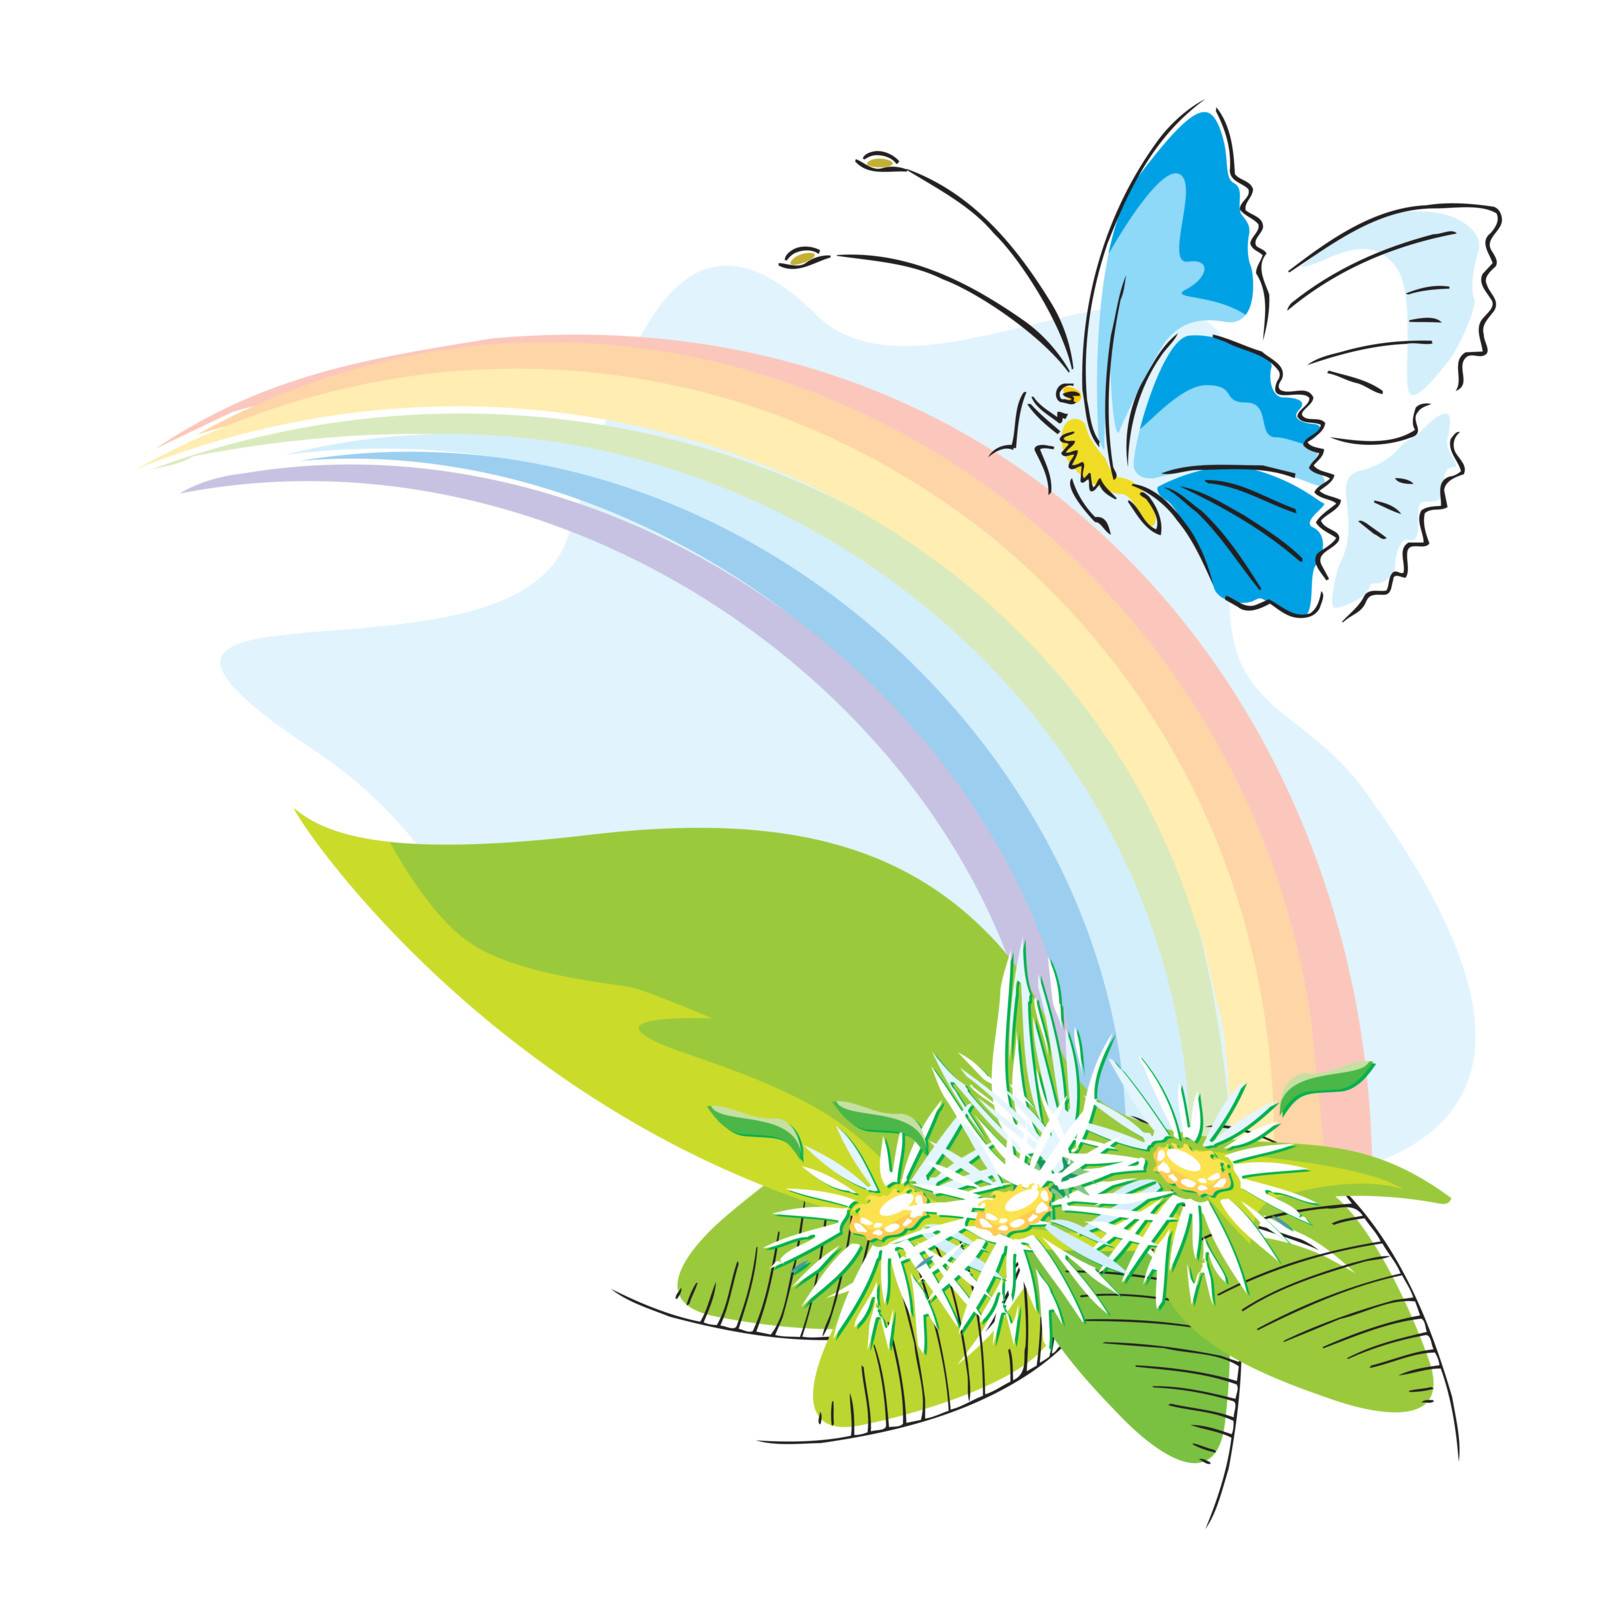 Rainbow with flowers and butterflies vector illustration